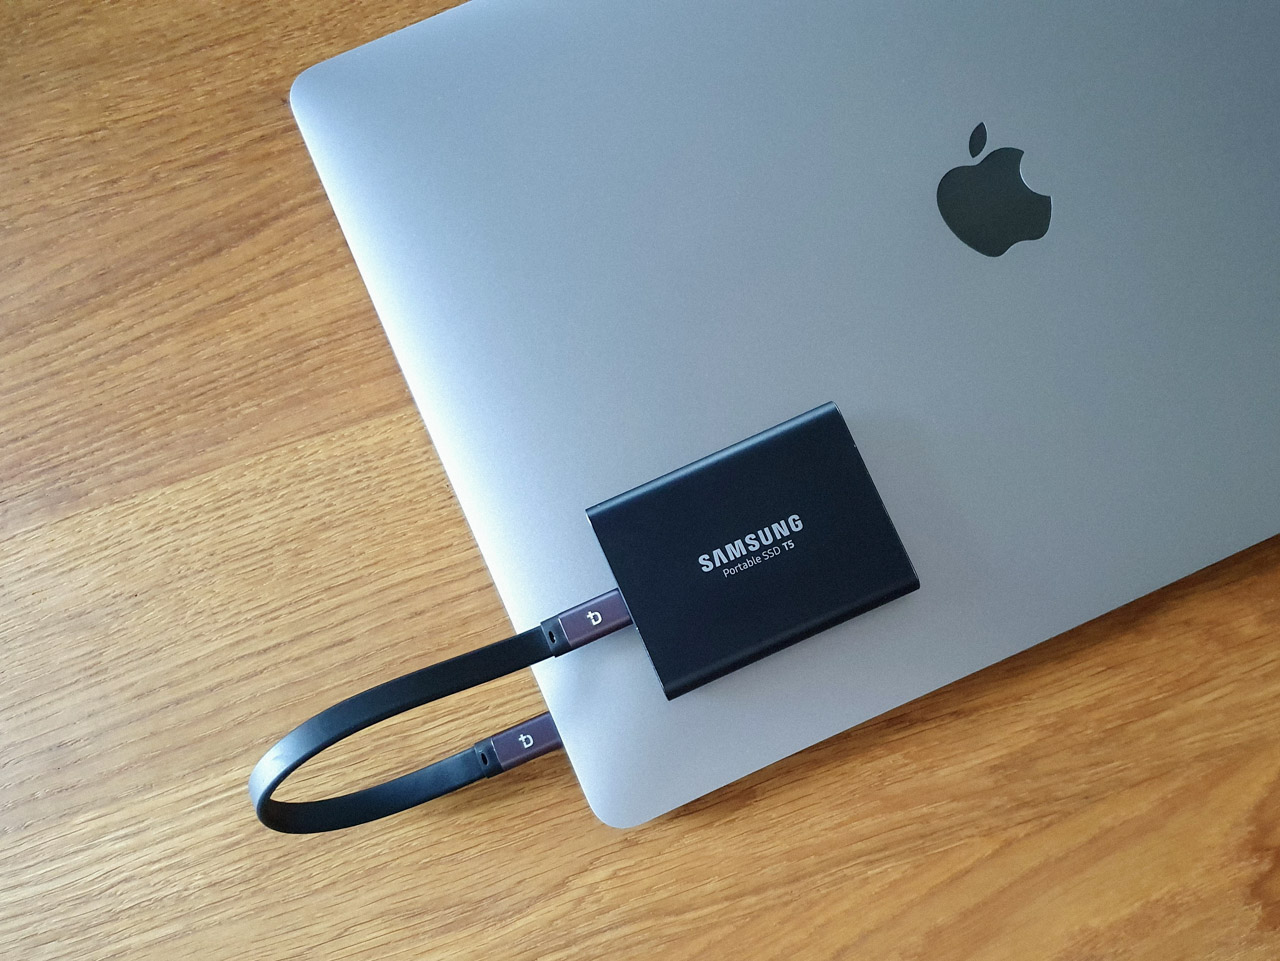 MacBook Pro with External SSD